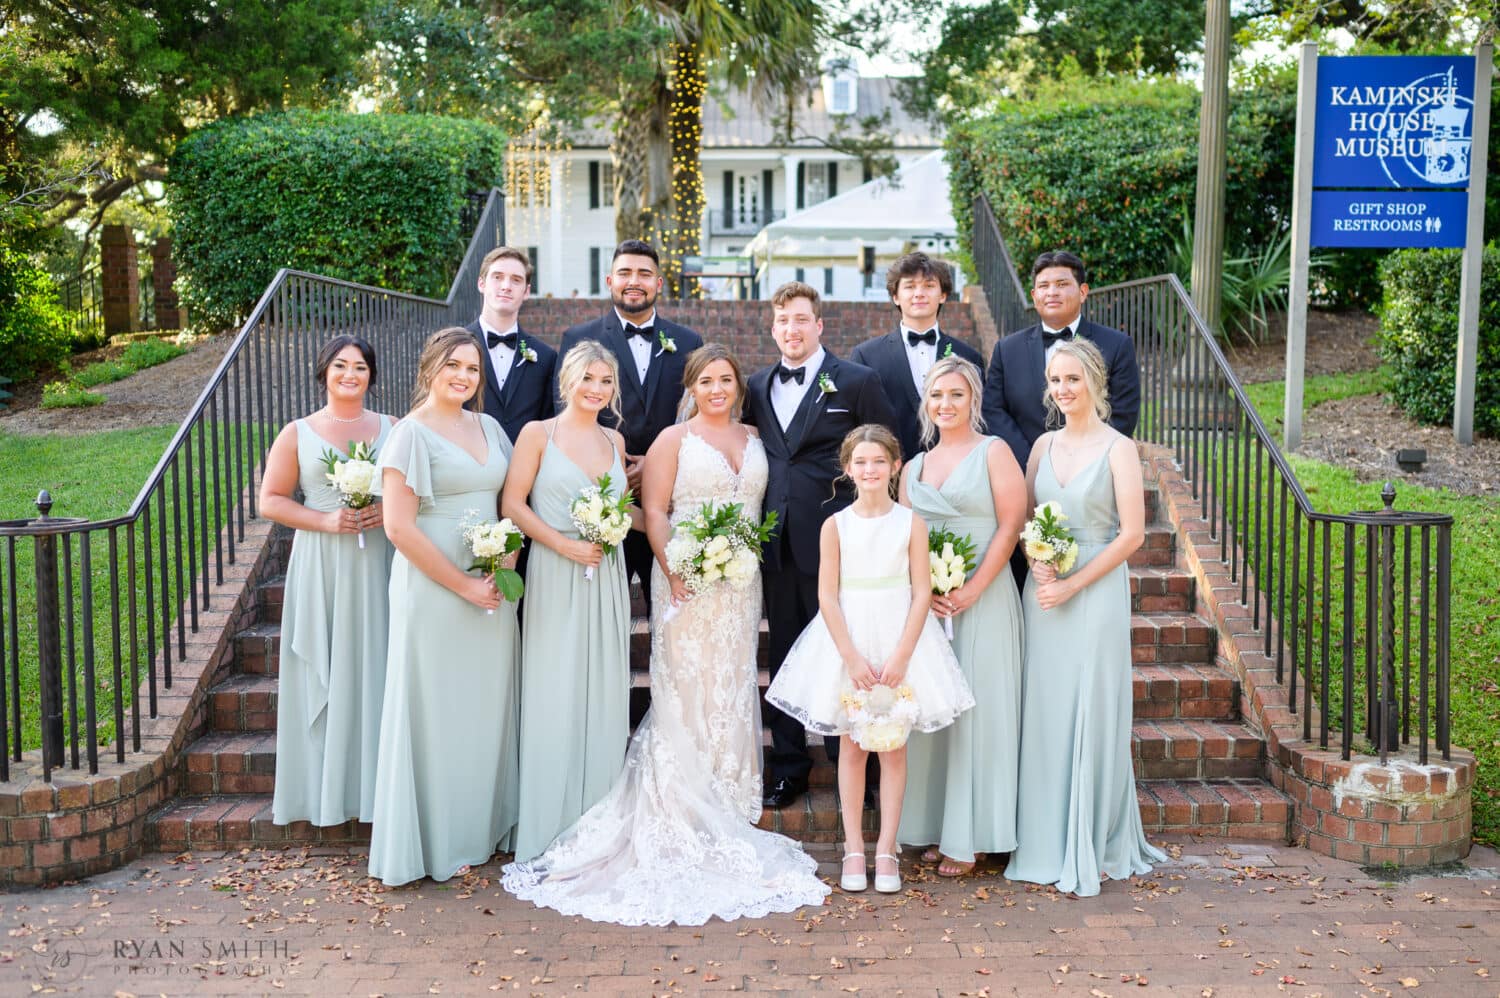 Bridal party by the steps of the museum - Kaminski House Museum